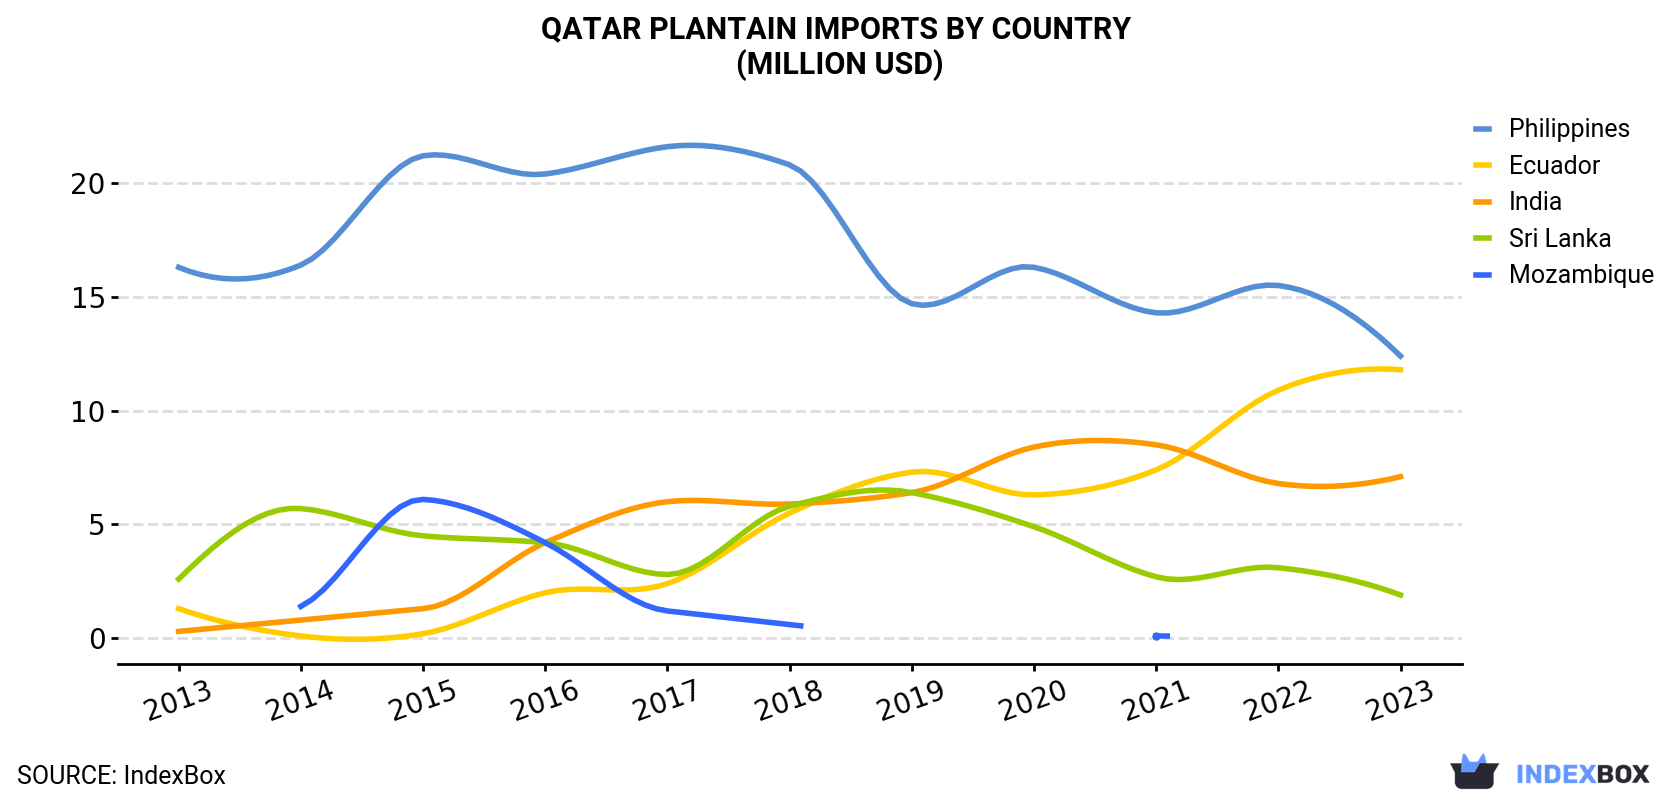 Qatar Plantain Imports By Country (Million USD)